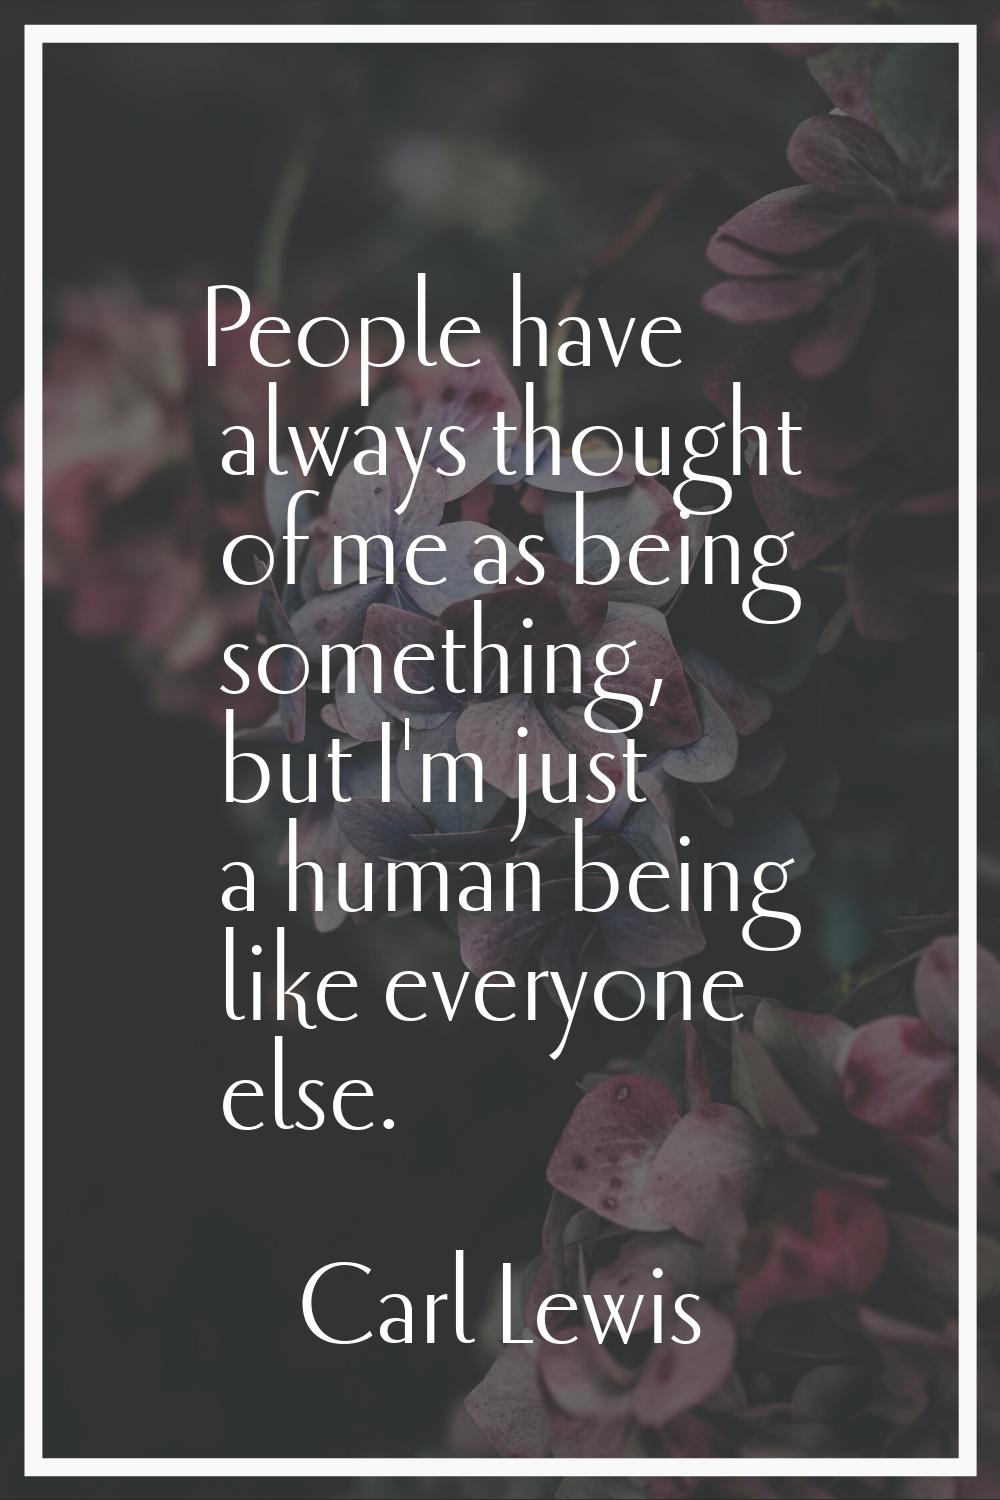 People have always thought of me as being something, but I'm just a human being like everyone else.